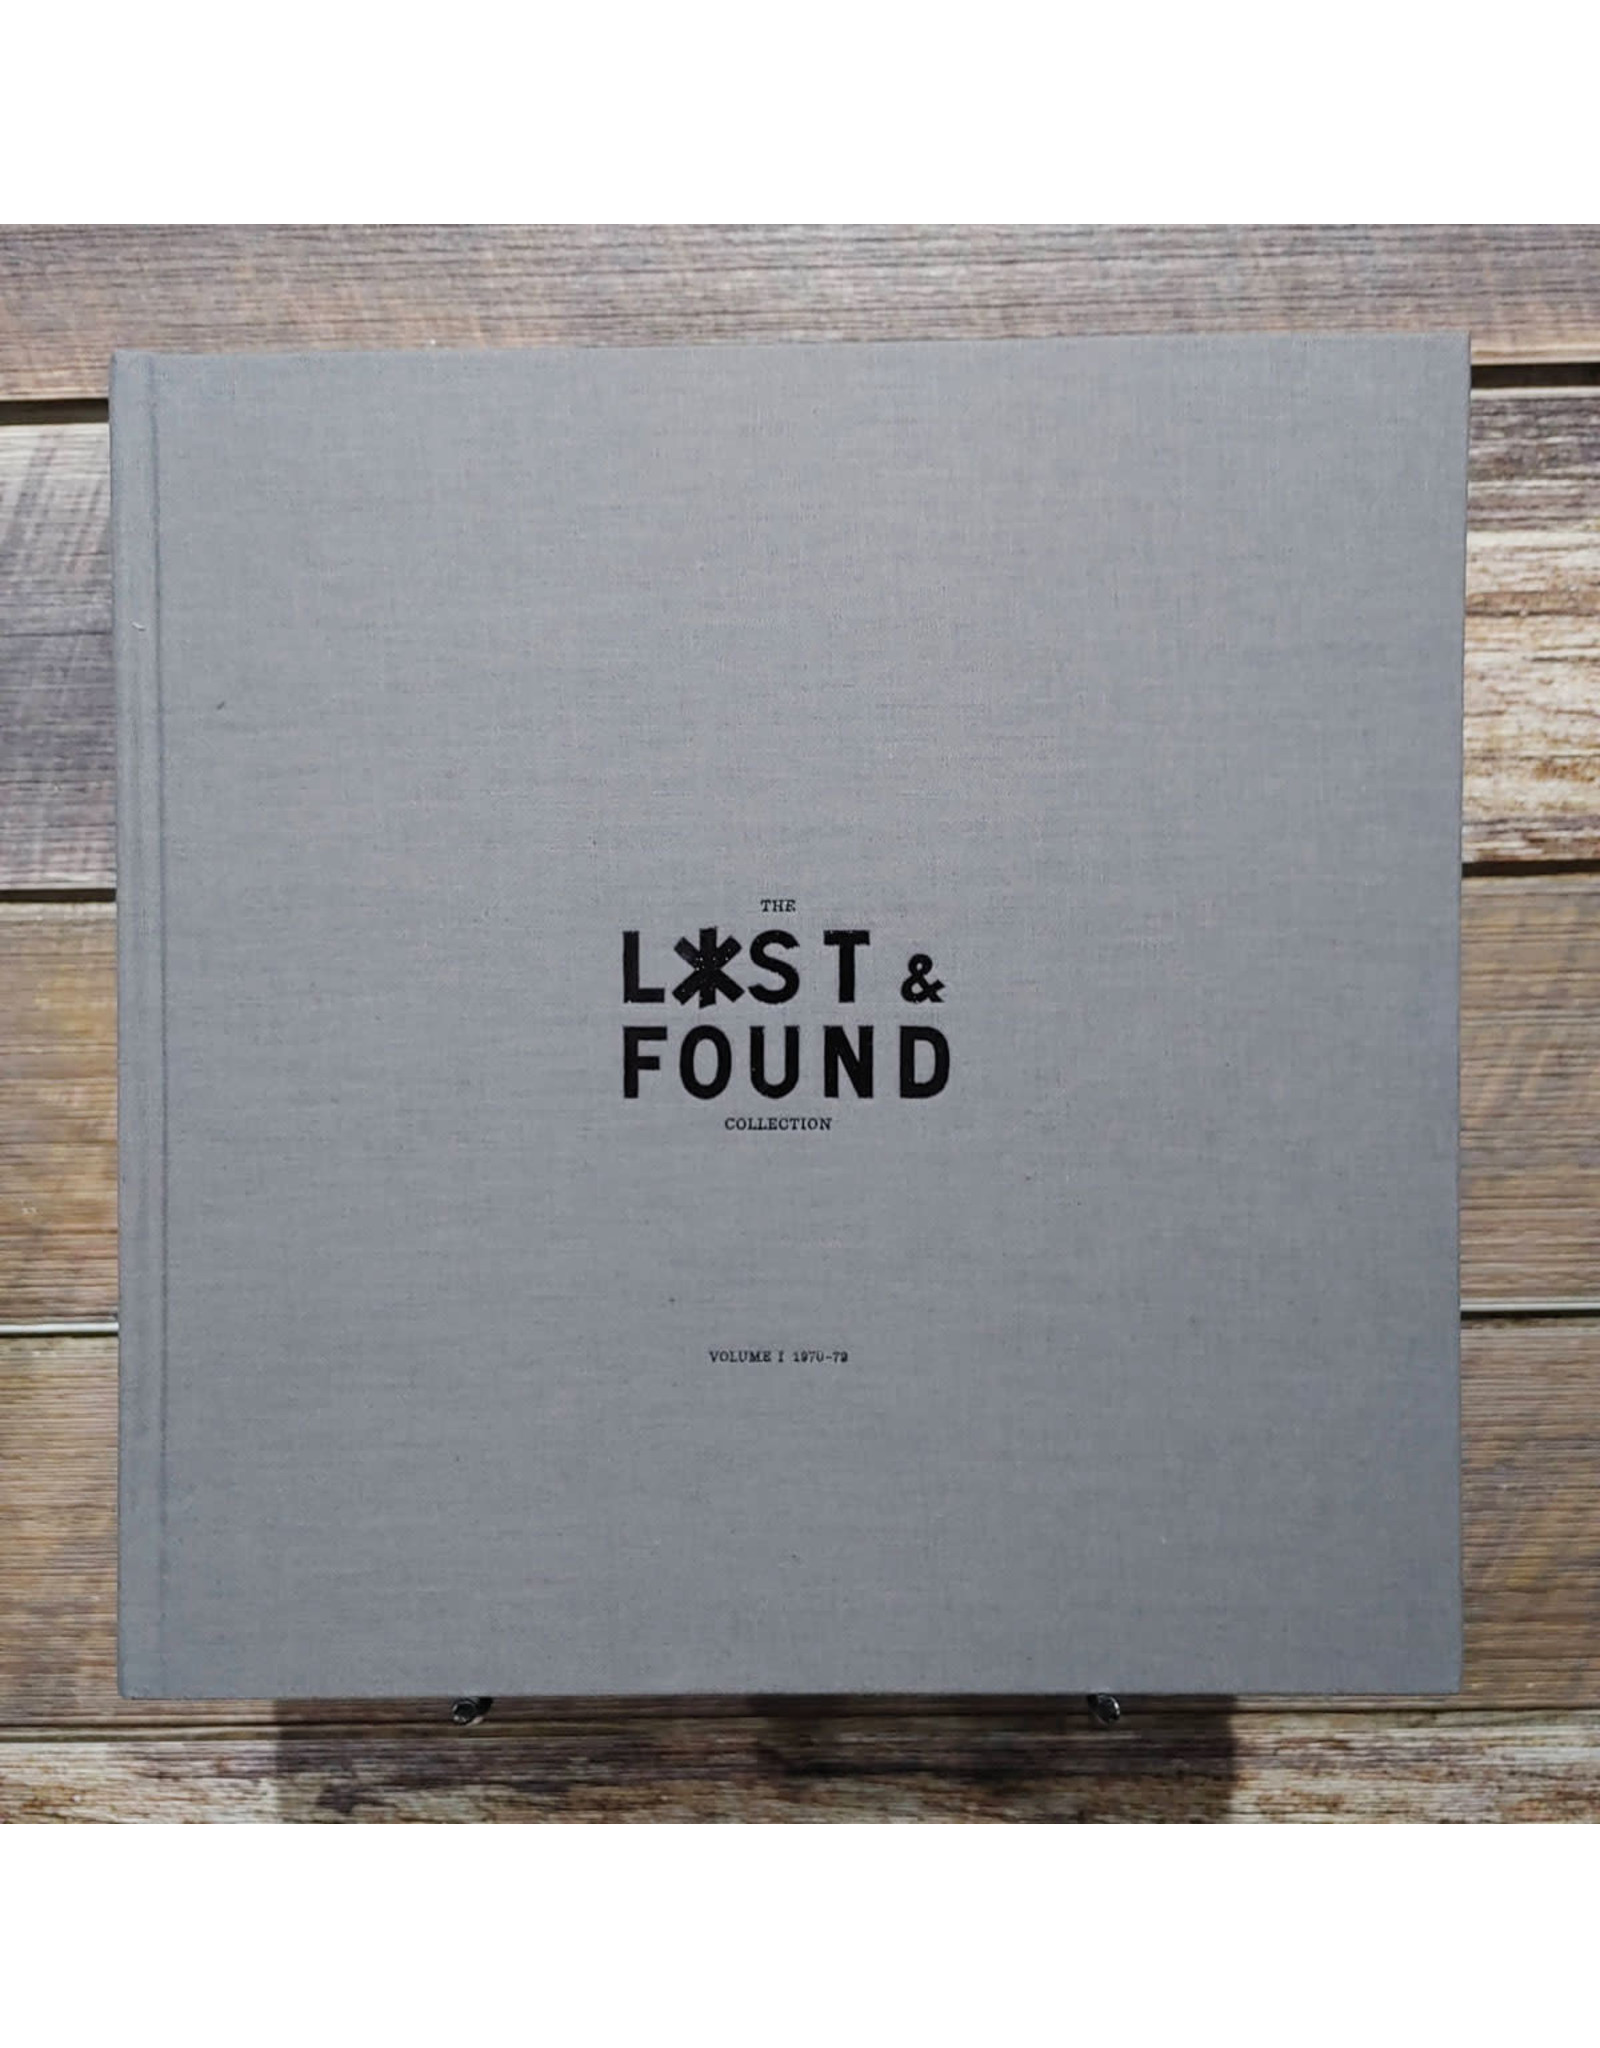 Global Surf Network The Lost & Found Collection Gallery Book Volume I 1970-79